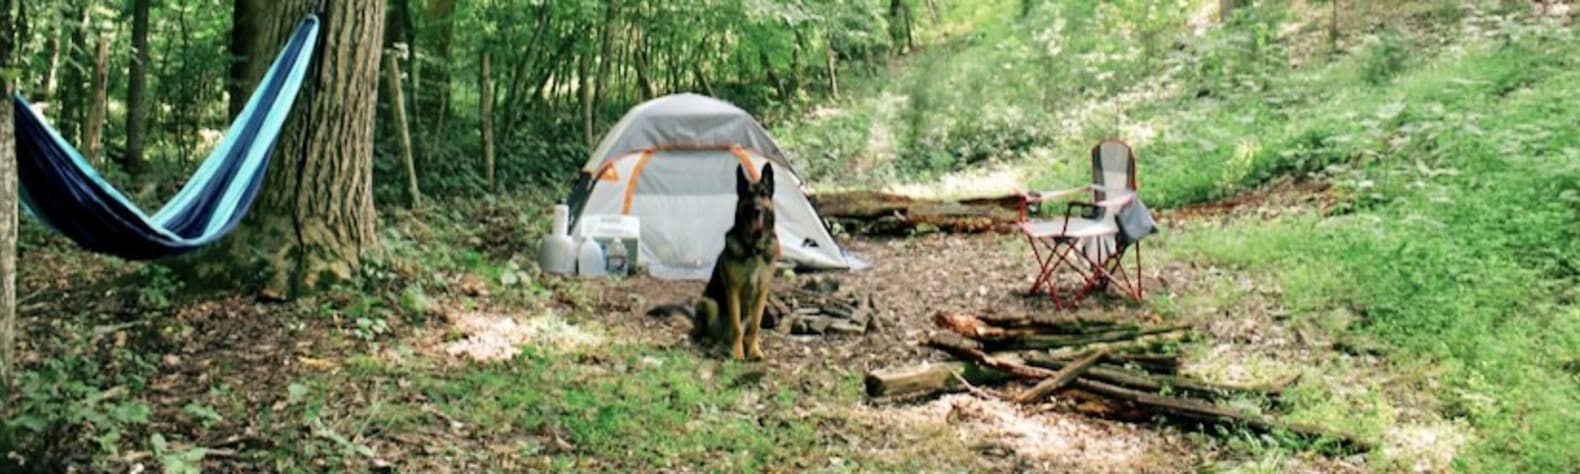 Creekside Camping, Forest & Field